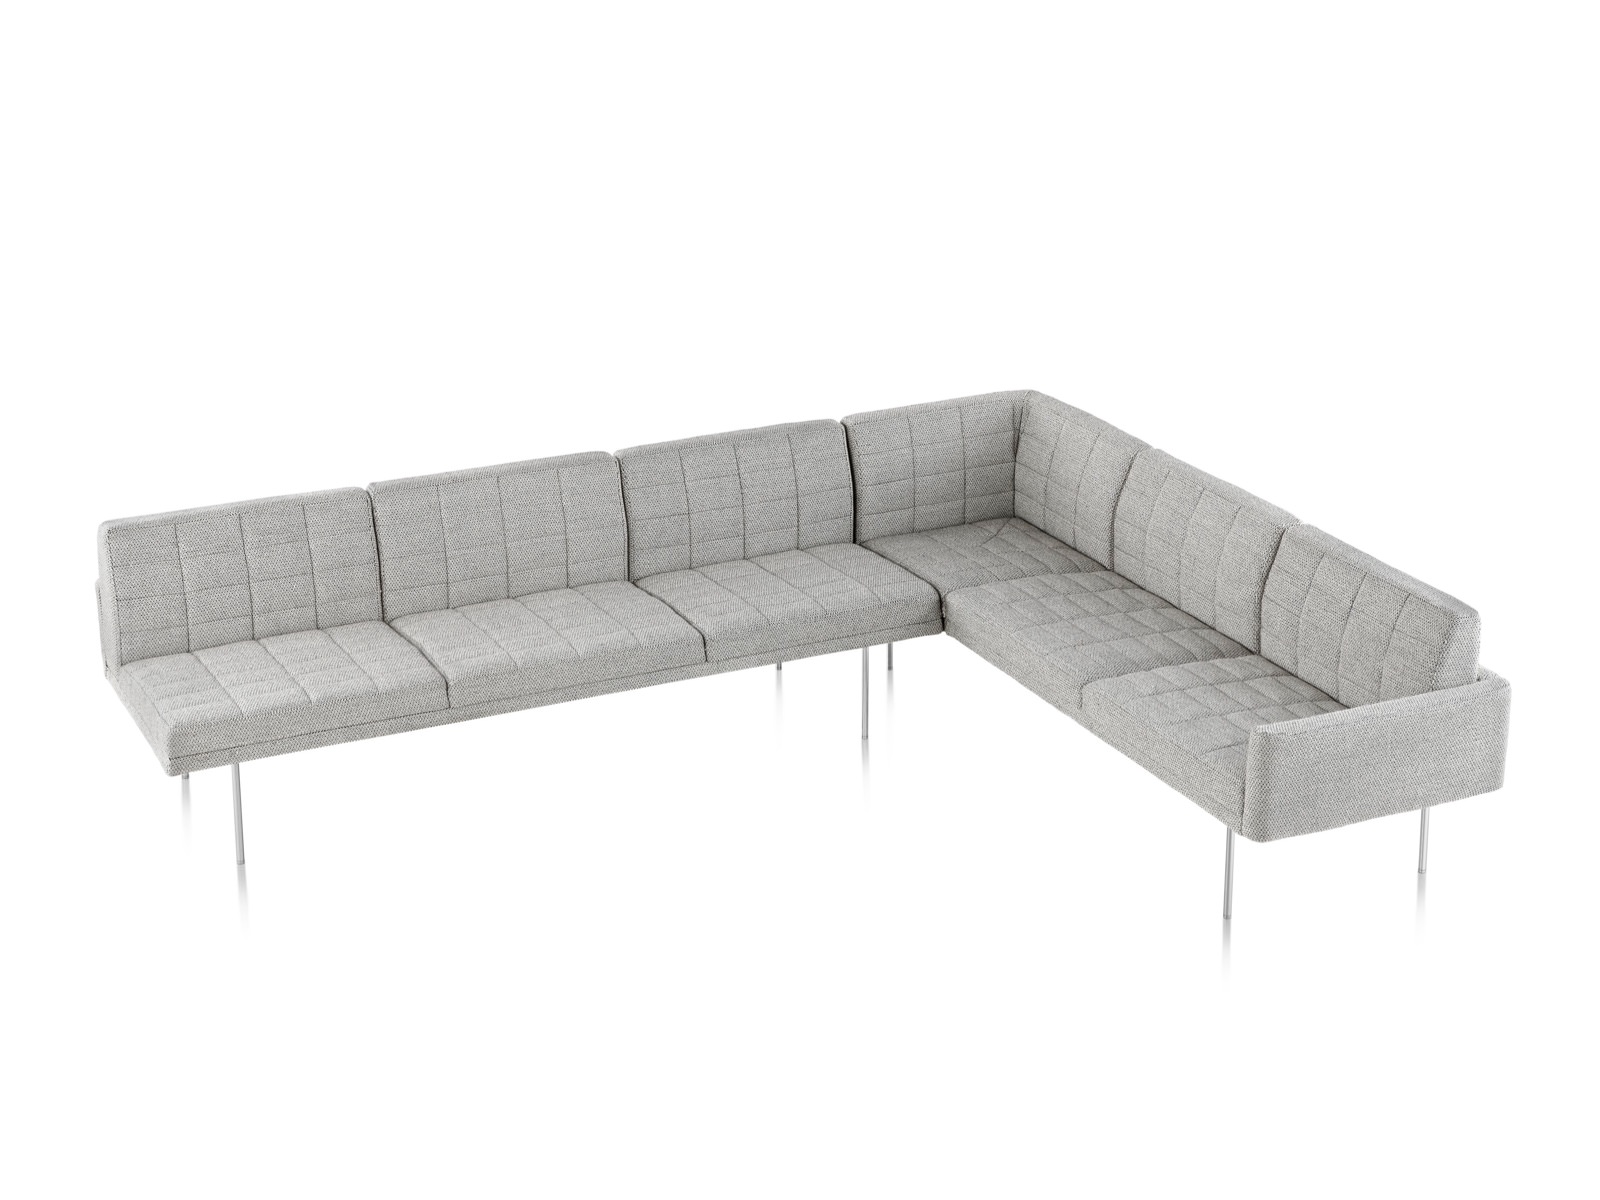 Overhead view of a Tuxedo sectional with quilted light gray upholstery.